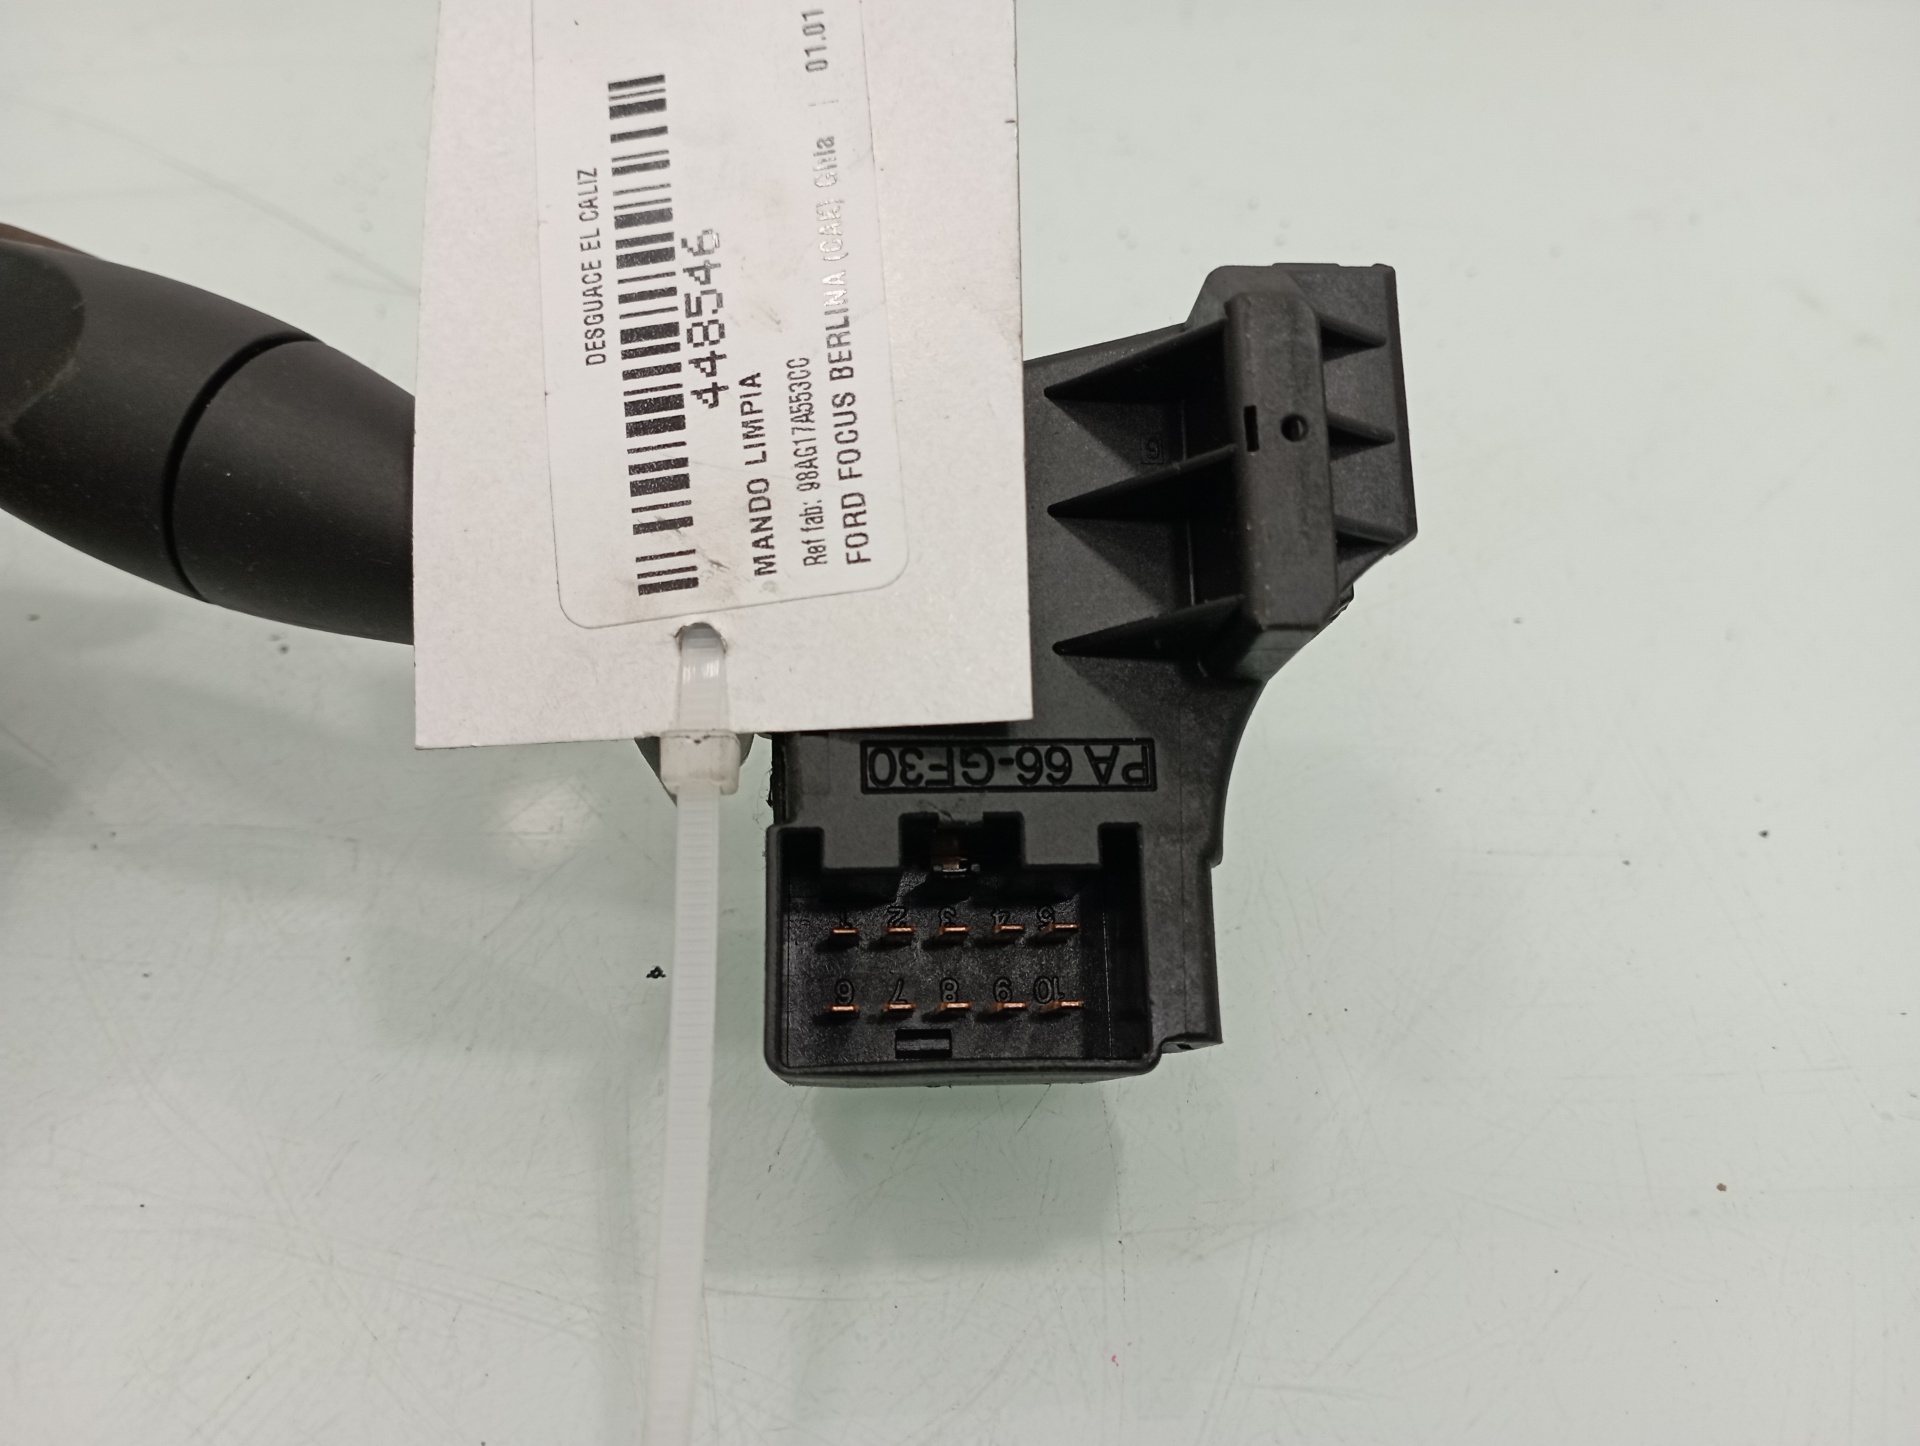 FORD Focus 1 generation (1998-2010) Indicator Wiper Stalk Switch 98AG17A553CC 19142397